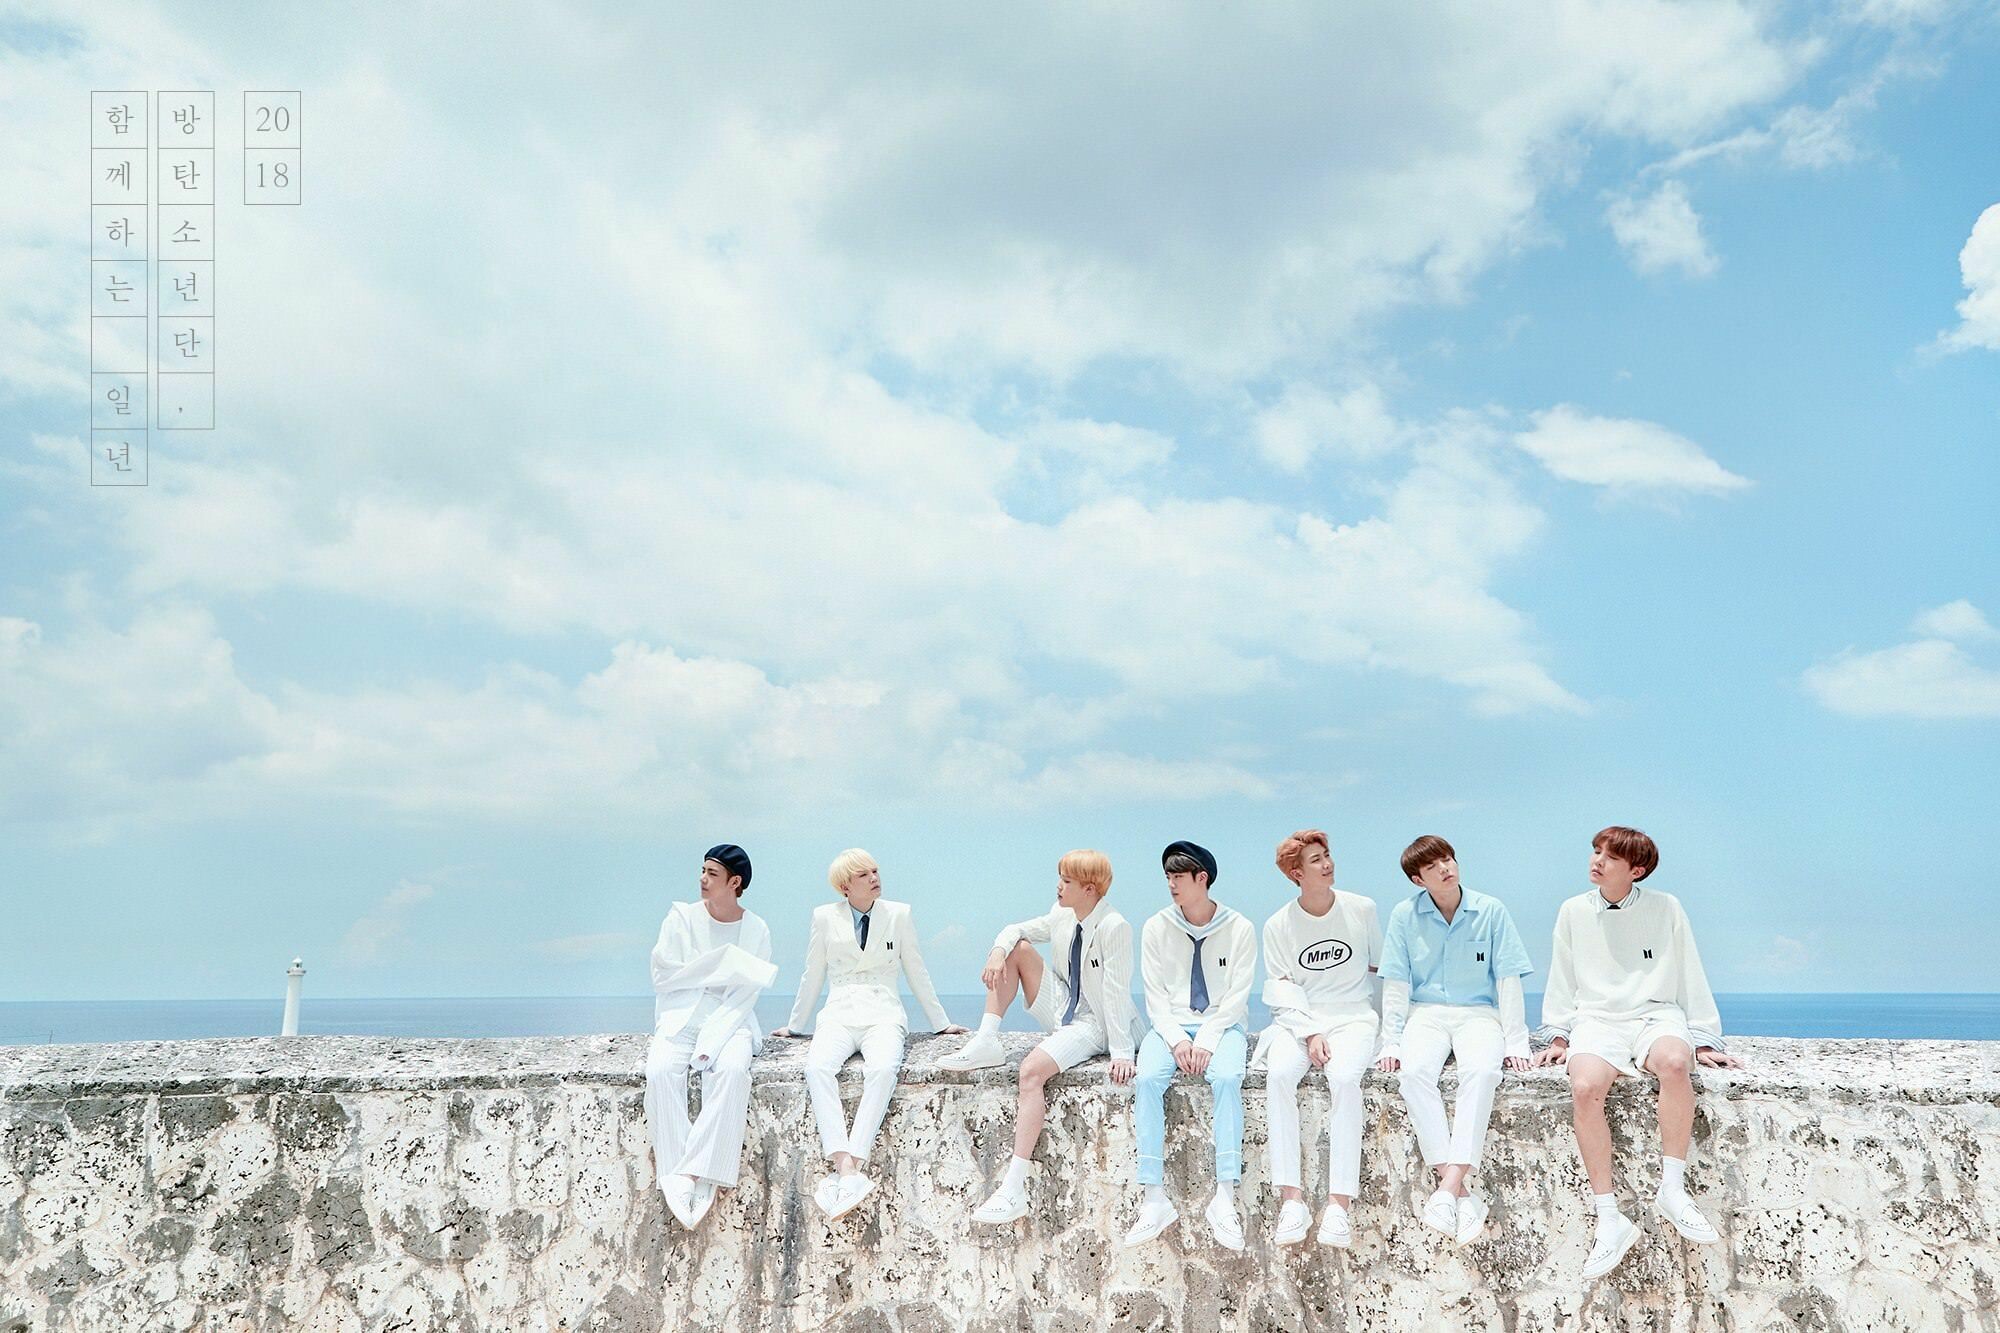 BTS Wallpaper: HD, 4K, 5K for PC and Mobile. Download free image for iPhone, Android